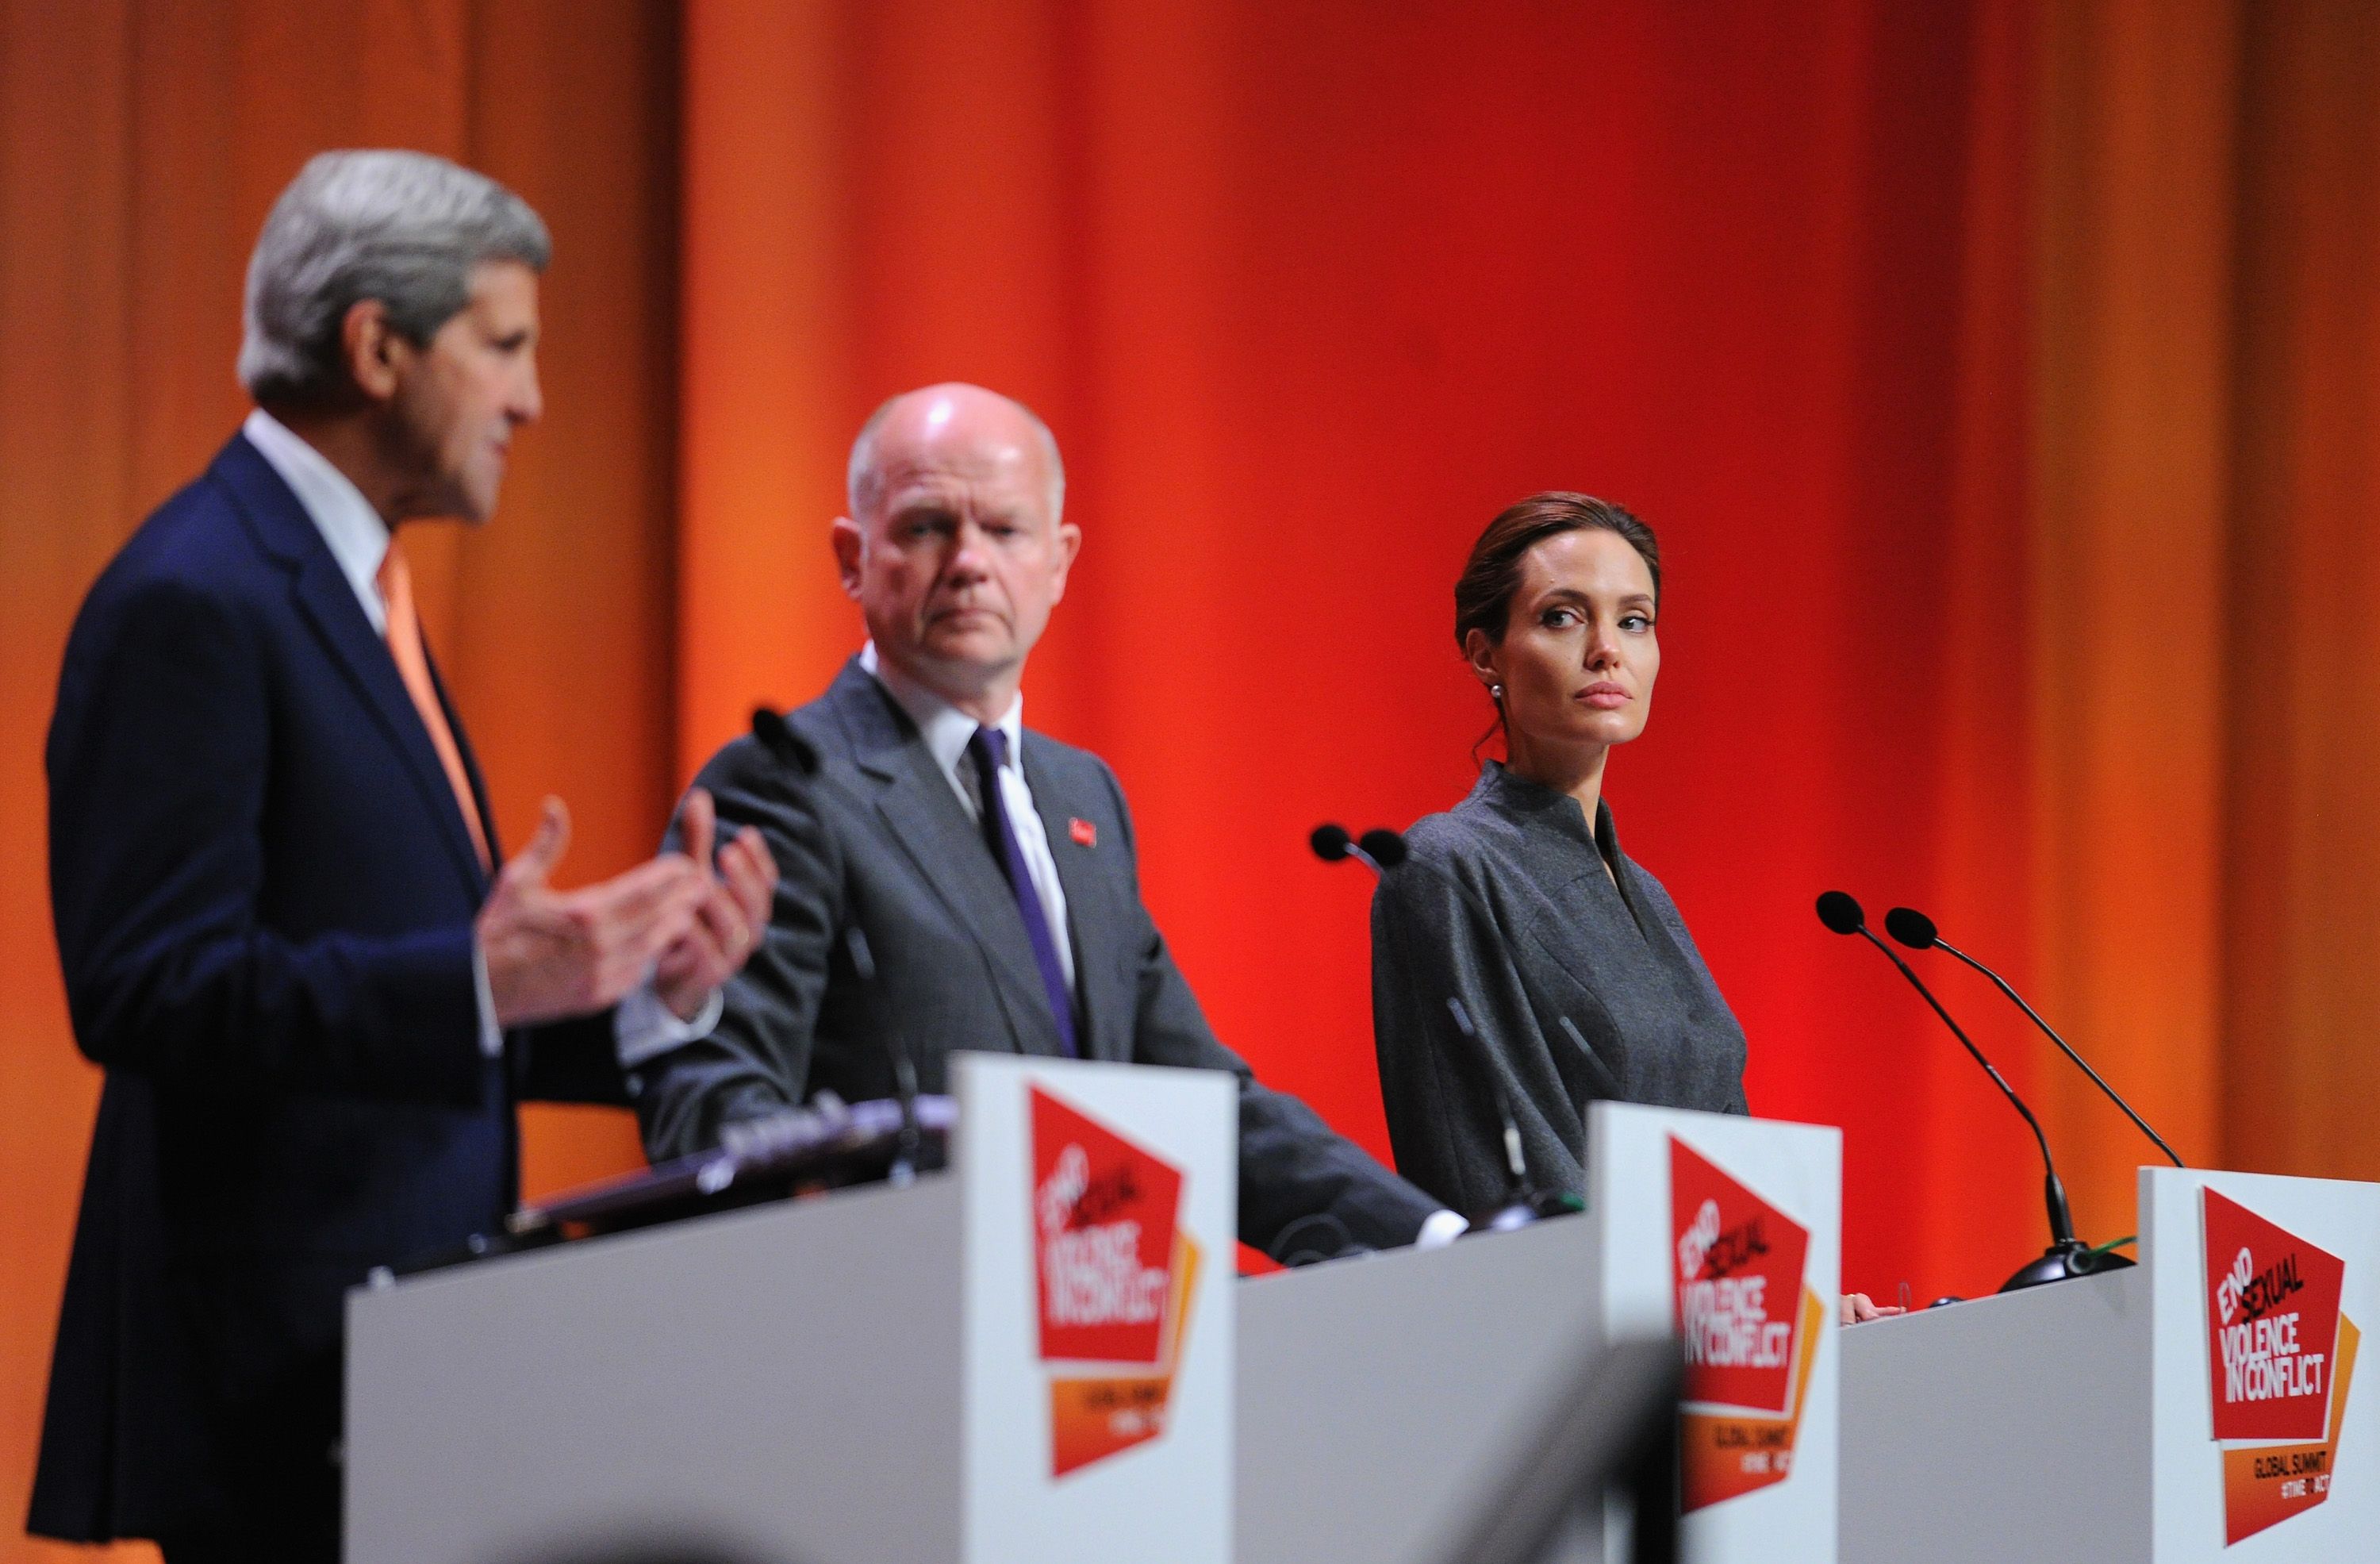 LONDON, ENGLAND - JUNE 13: United States Secretary of State John Kerry, British Foreign Secretary William Hague, UN Special Envoy and actress Angelina Jolie attend the Global Summit to End Sexual Violence in Conflict at ExCel on June 13, 2014 in London, England. The four-day conference on sexual violence in war is hosted by Foreign Secretary William Hague and UN Special Envoy and actress Angelina Jolie. (Photo by Eamonn M. McCormack/Getty Images)